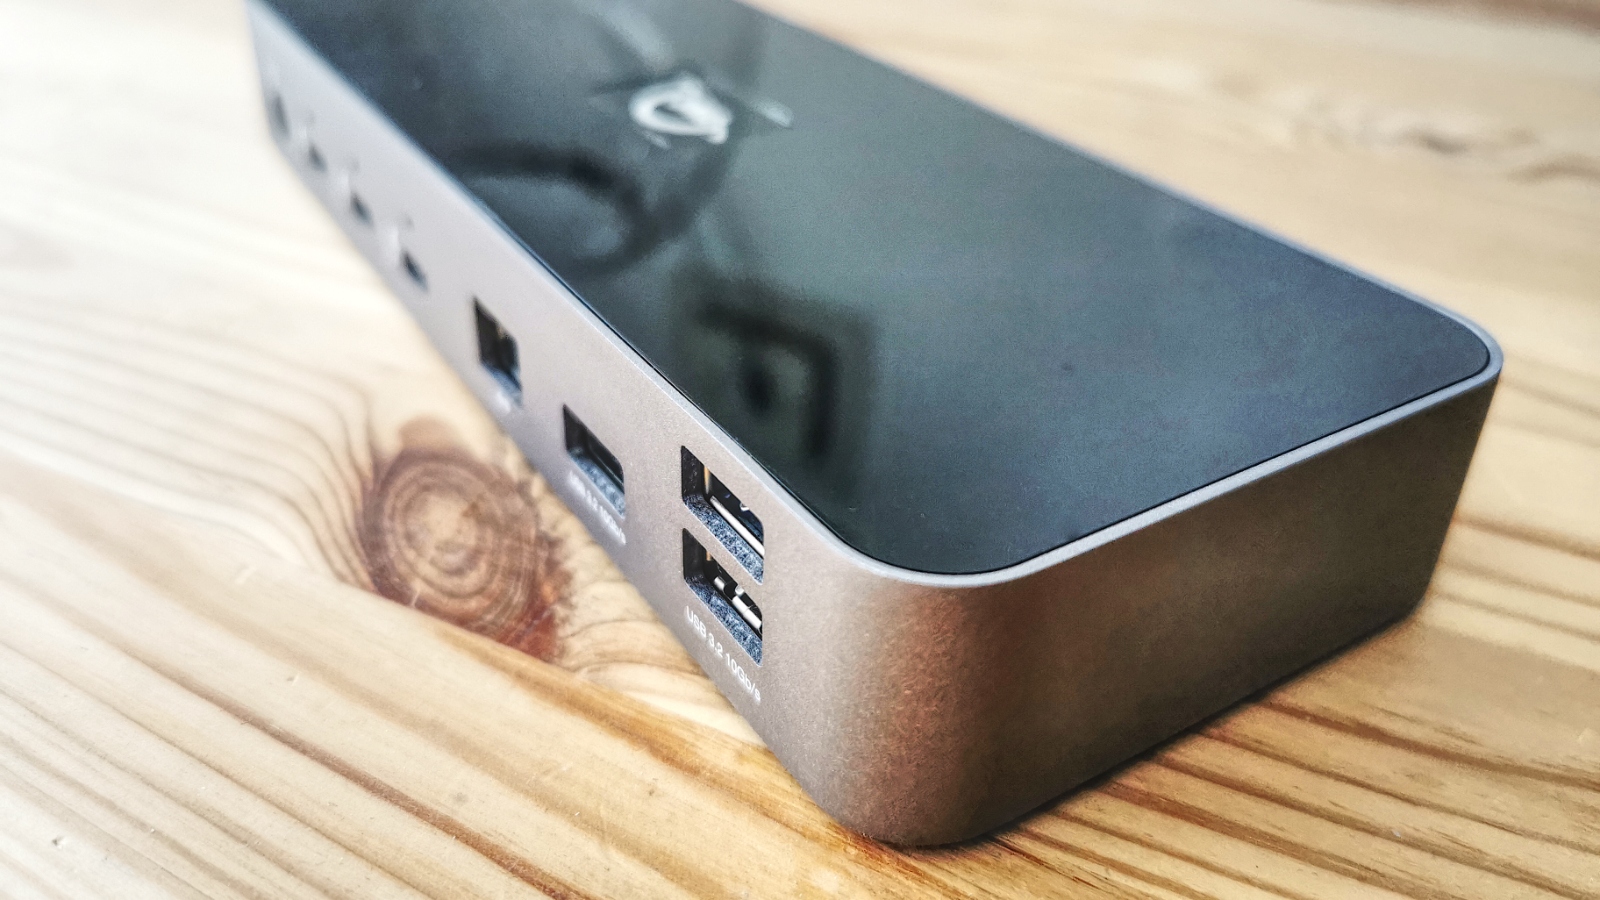 Satechi Pro Hub Slim review: Good port expansion for Mac, on a budget